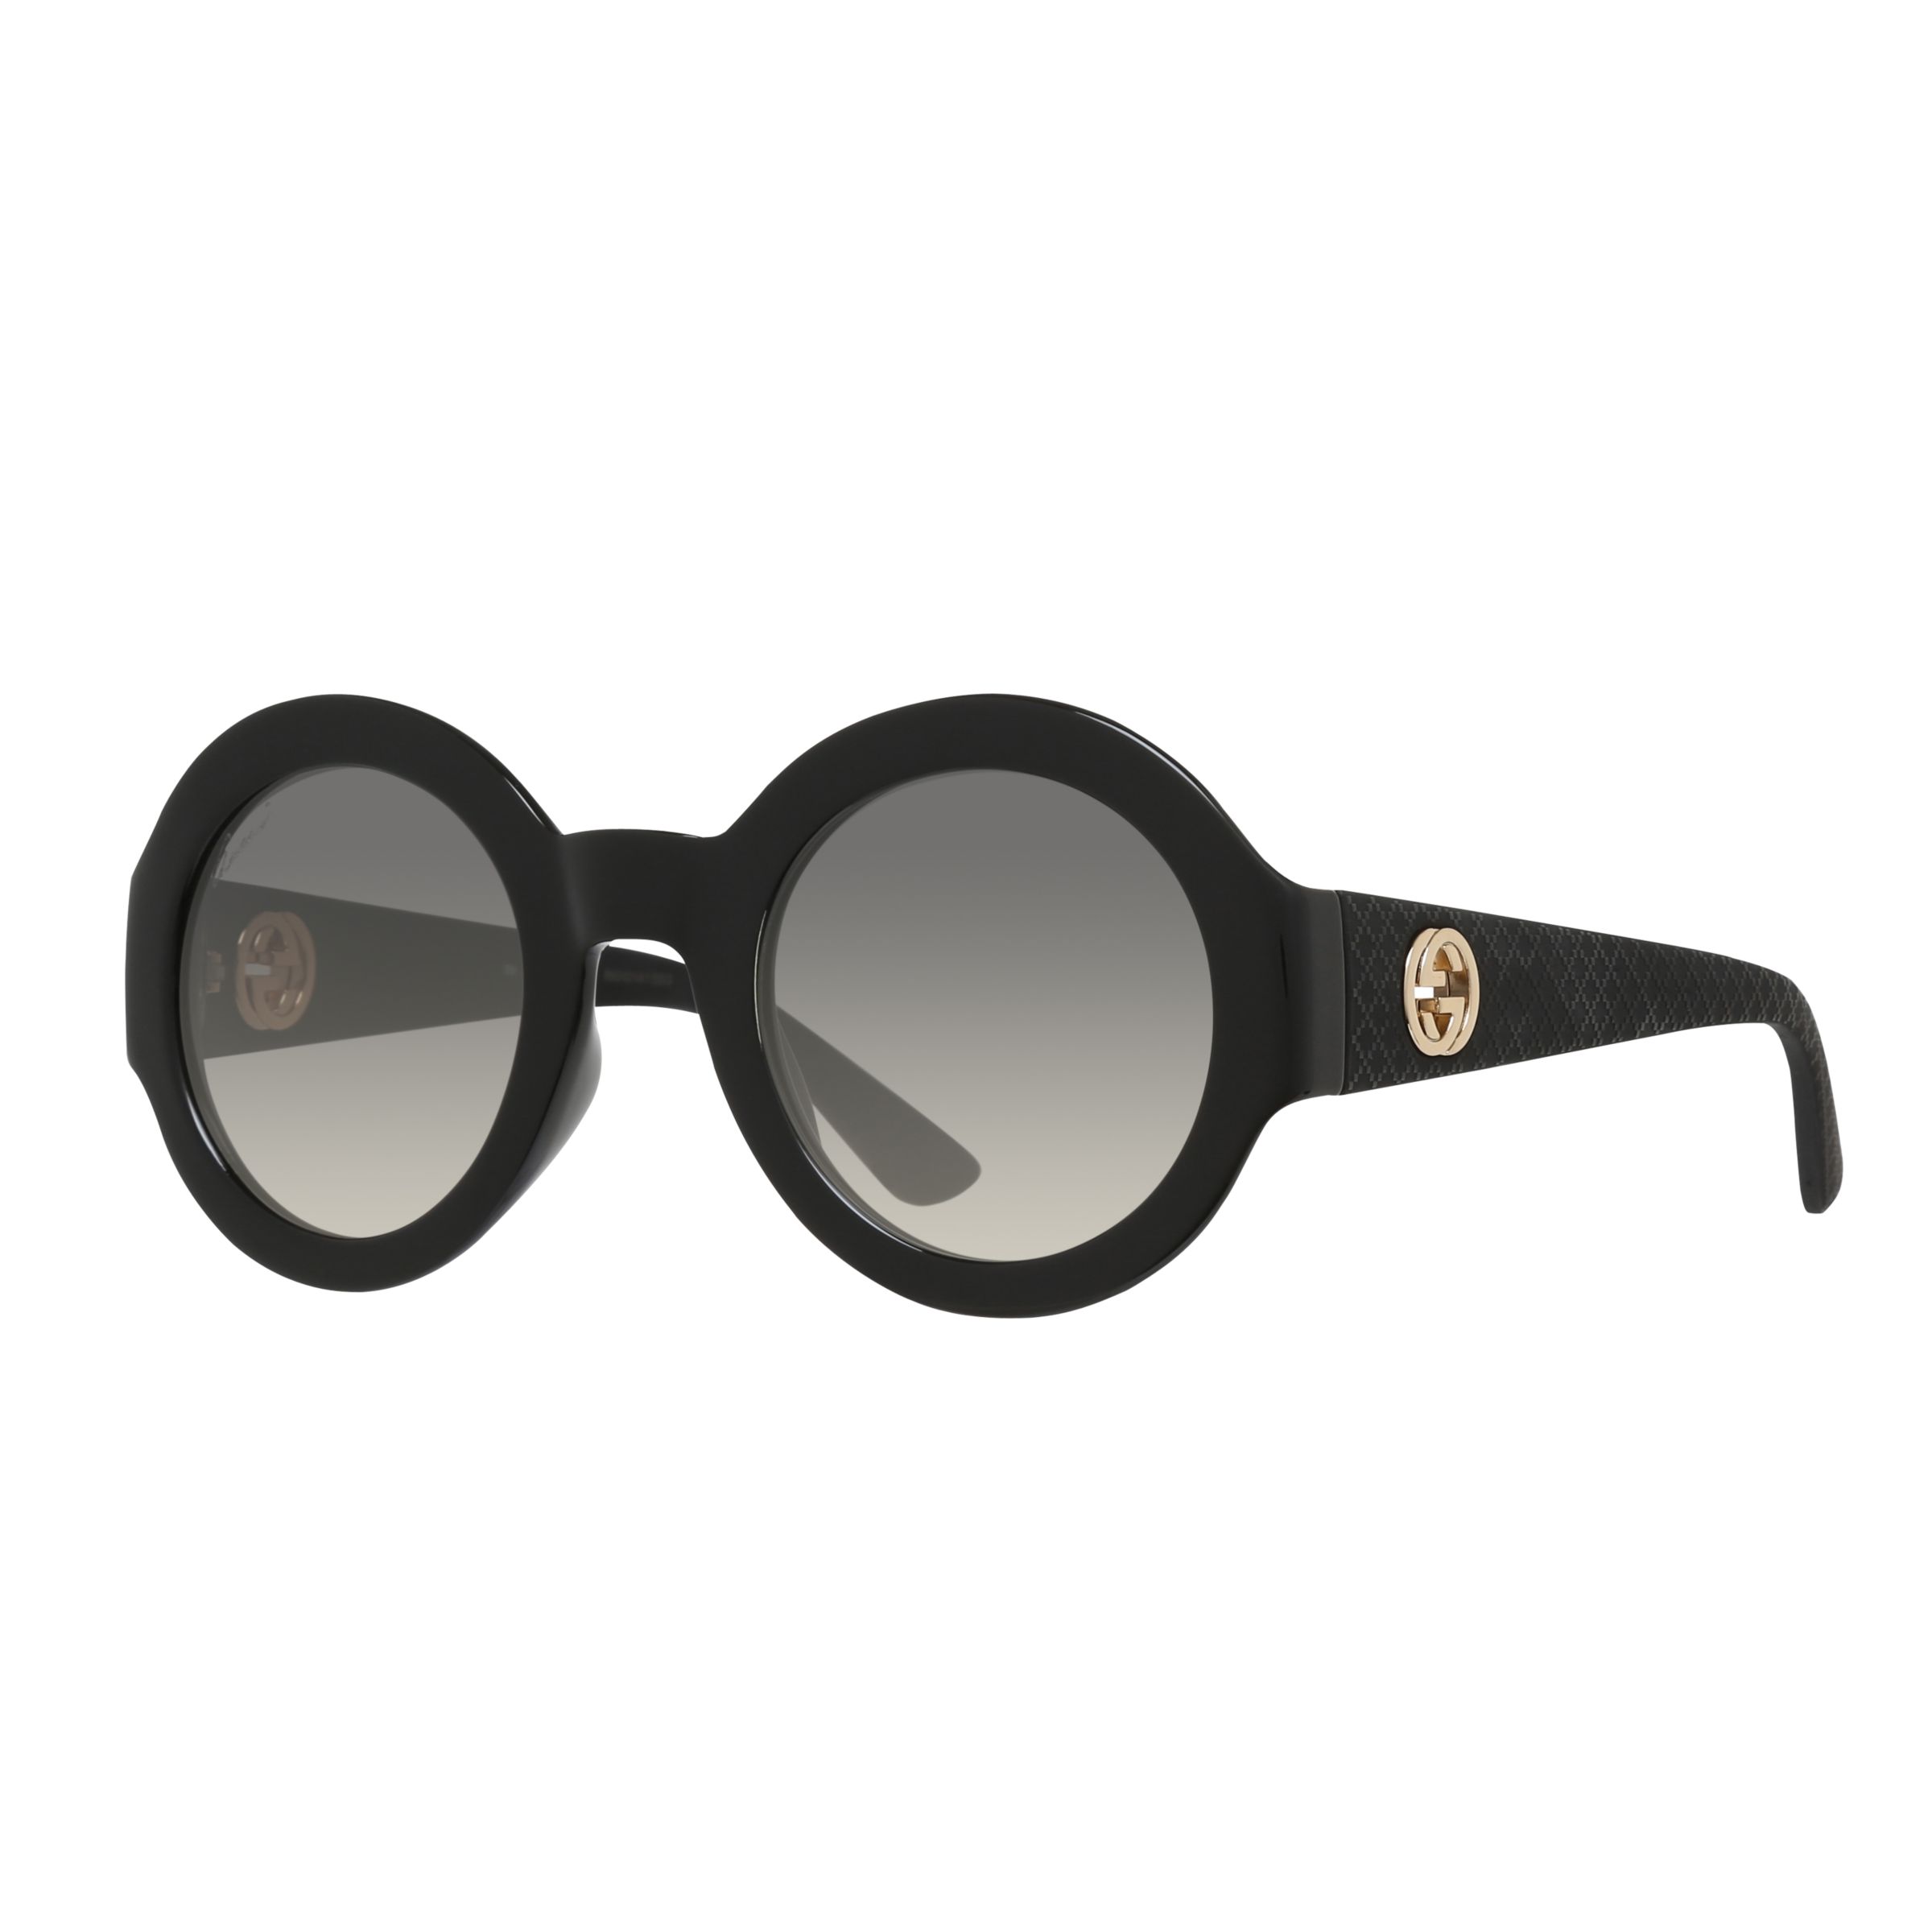 Gucci Gg 3788 S Round Sunglasses Matte Black Grey Gradient At John Lewis And Partners